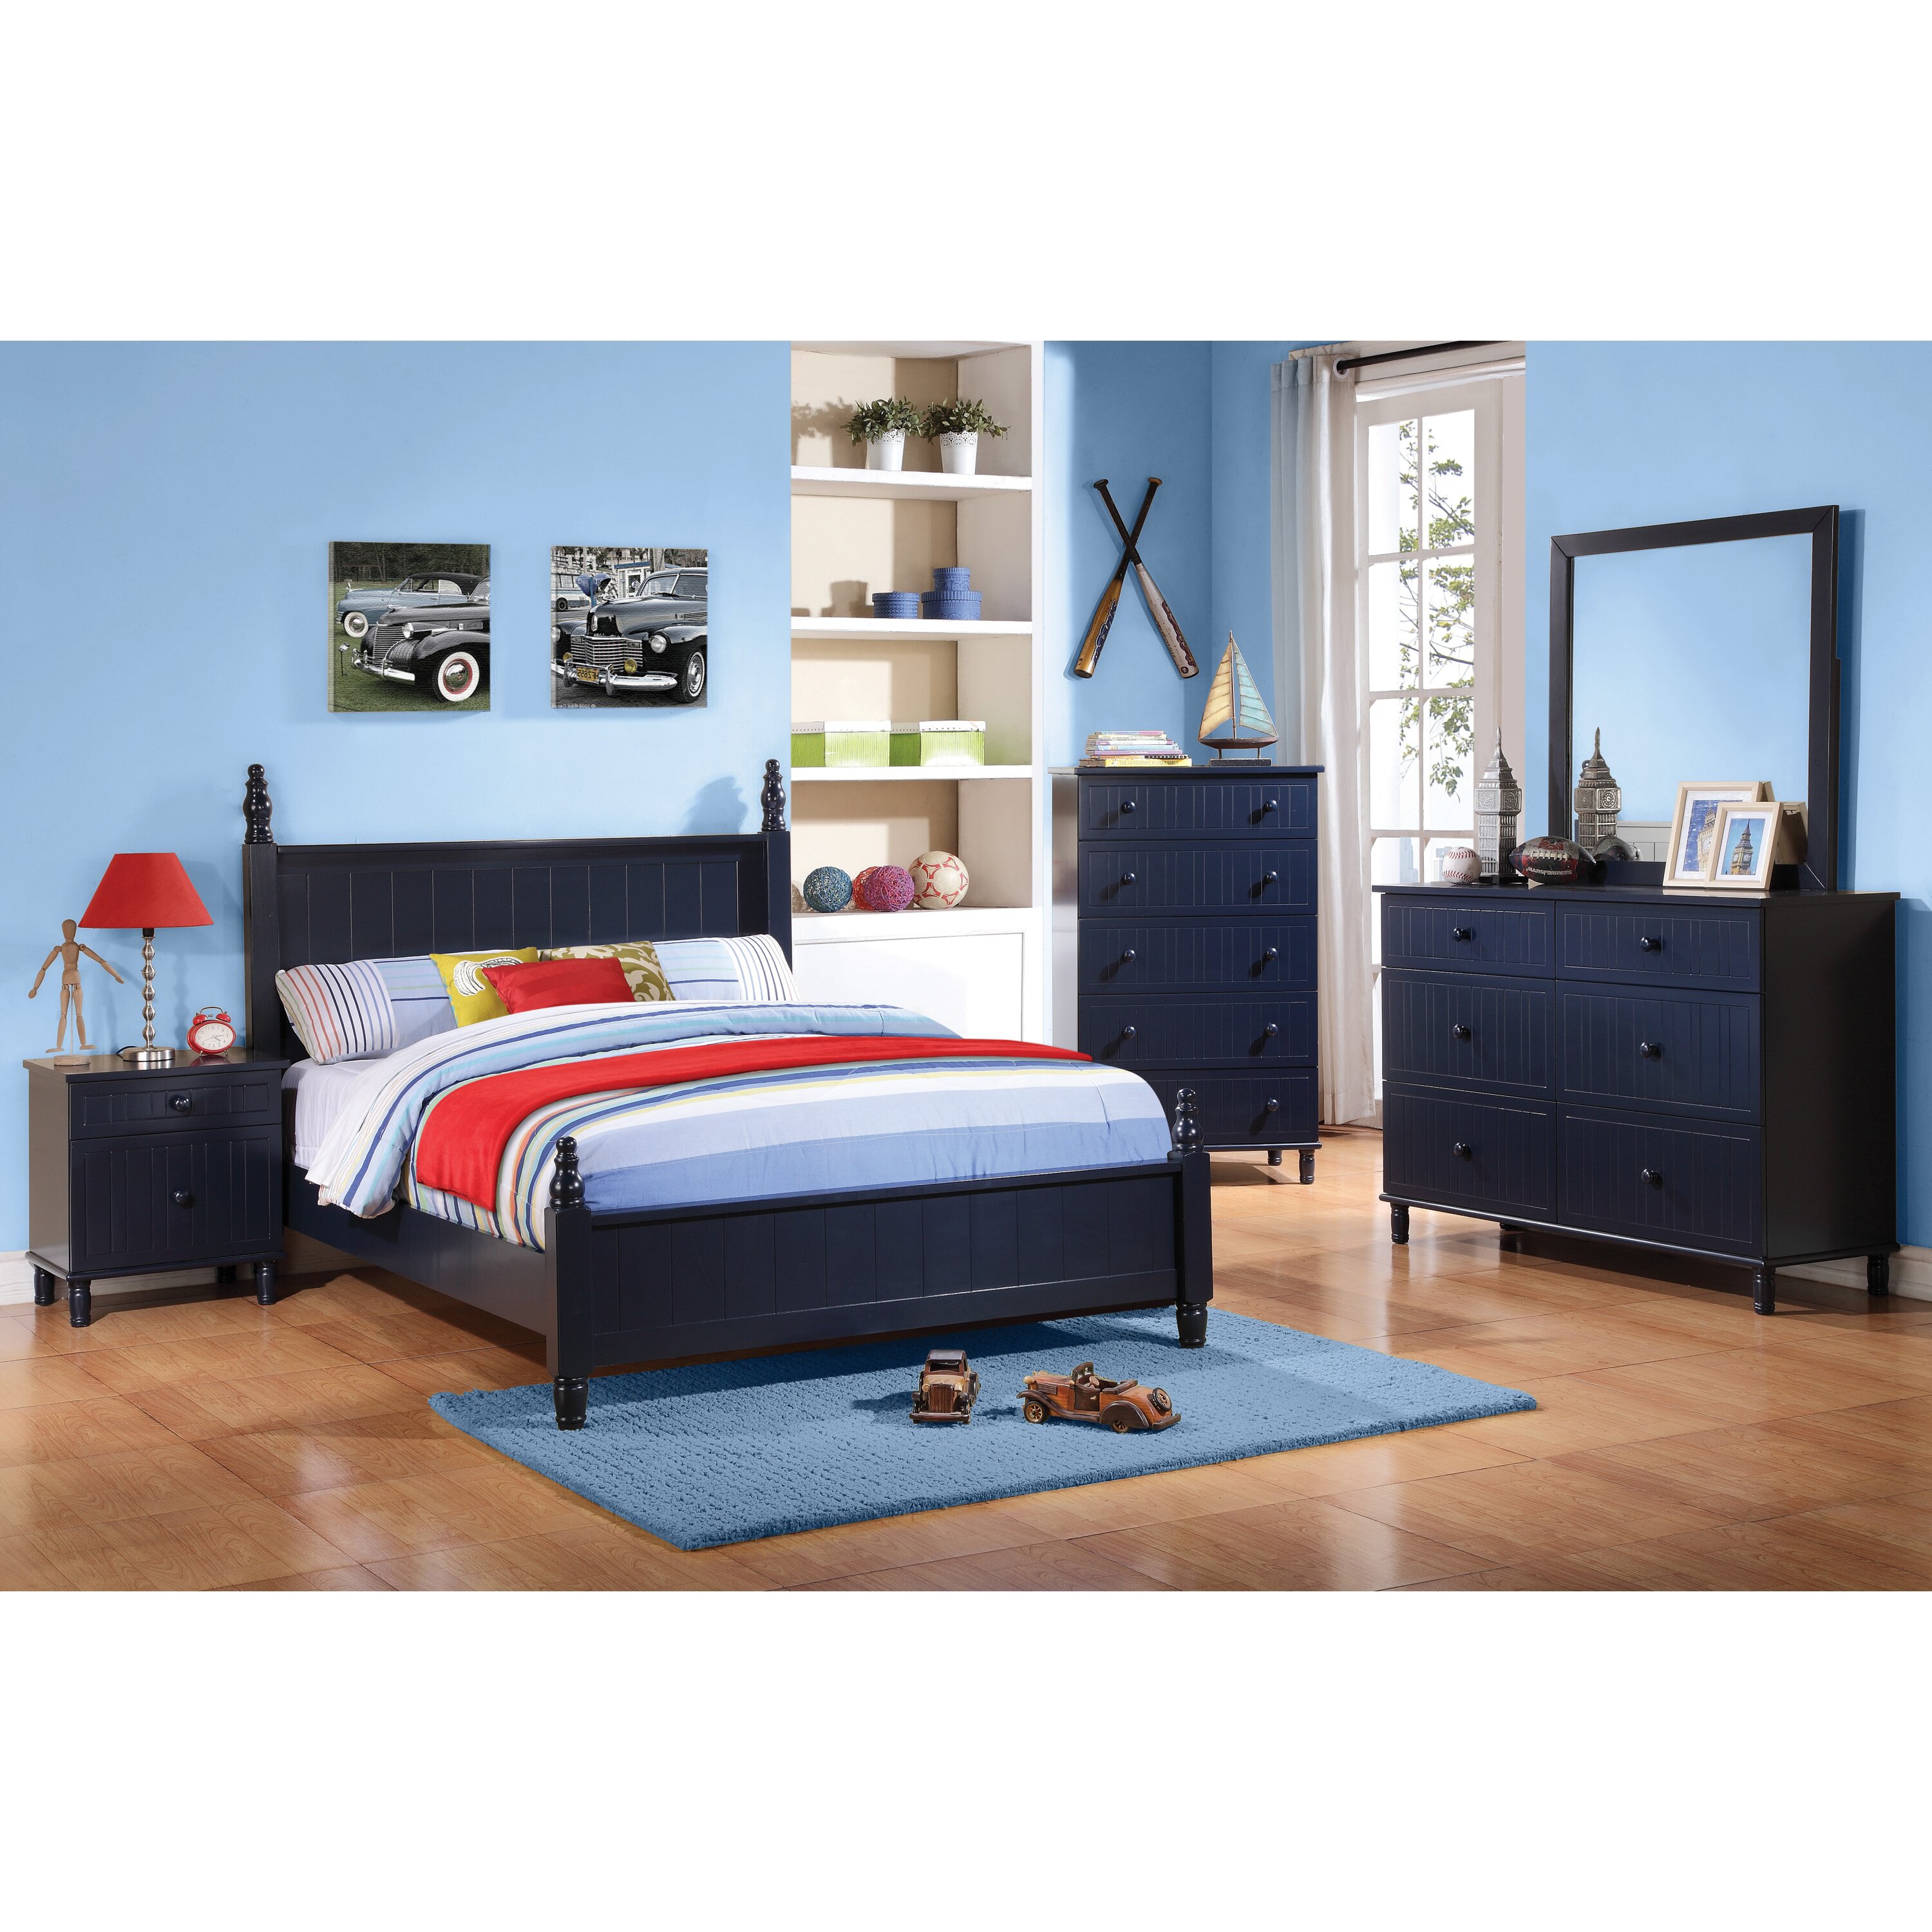 Wildon Home ® Zachary 6 Drawer Dresser With Mirror And Reviews Wayfair 3688